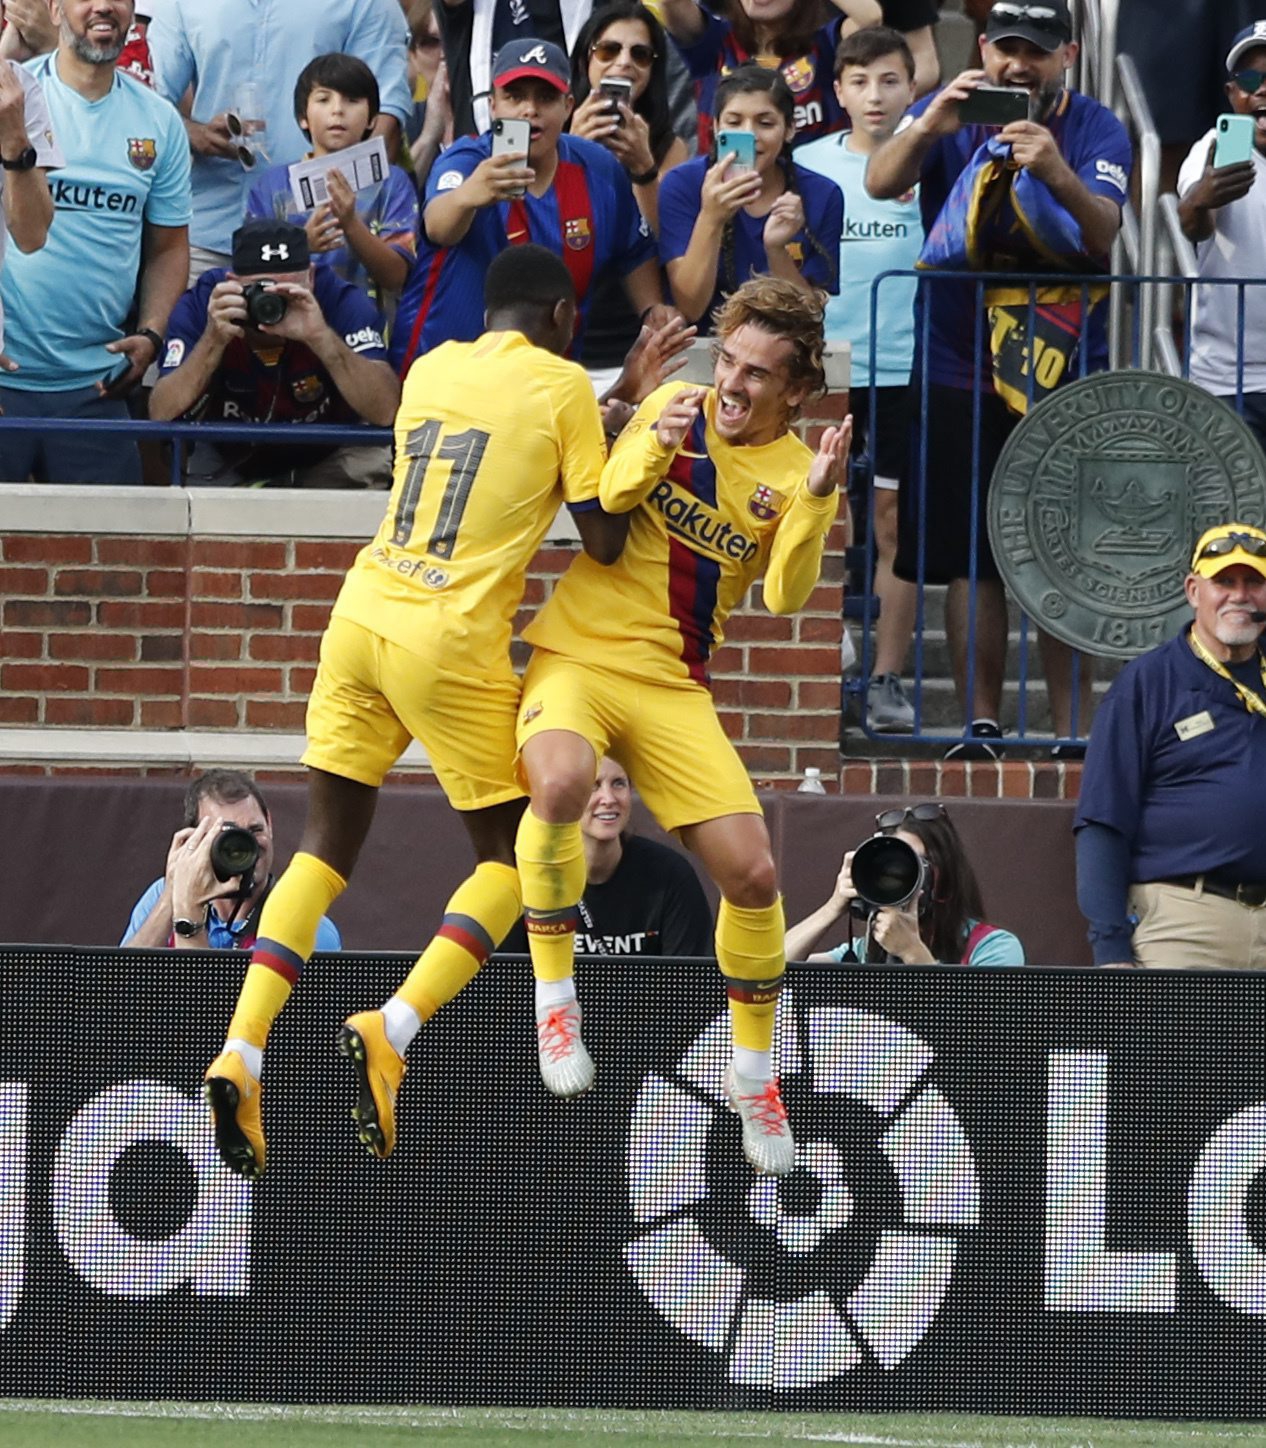 Barcelona forward Ousmane Dembele (11) and defender Antoine Griezmann celebrate Dembele's goal during the second half of a soccer match against Barcelona, Saturday, Aug. 10, 2019, in Ann Arbor, Mich. (AP Photo/Carlos Osorio)
Antoine Griezmann,Ousmane Dembele Barcelona Napoli Soccer